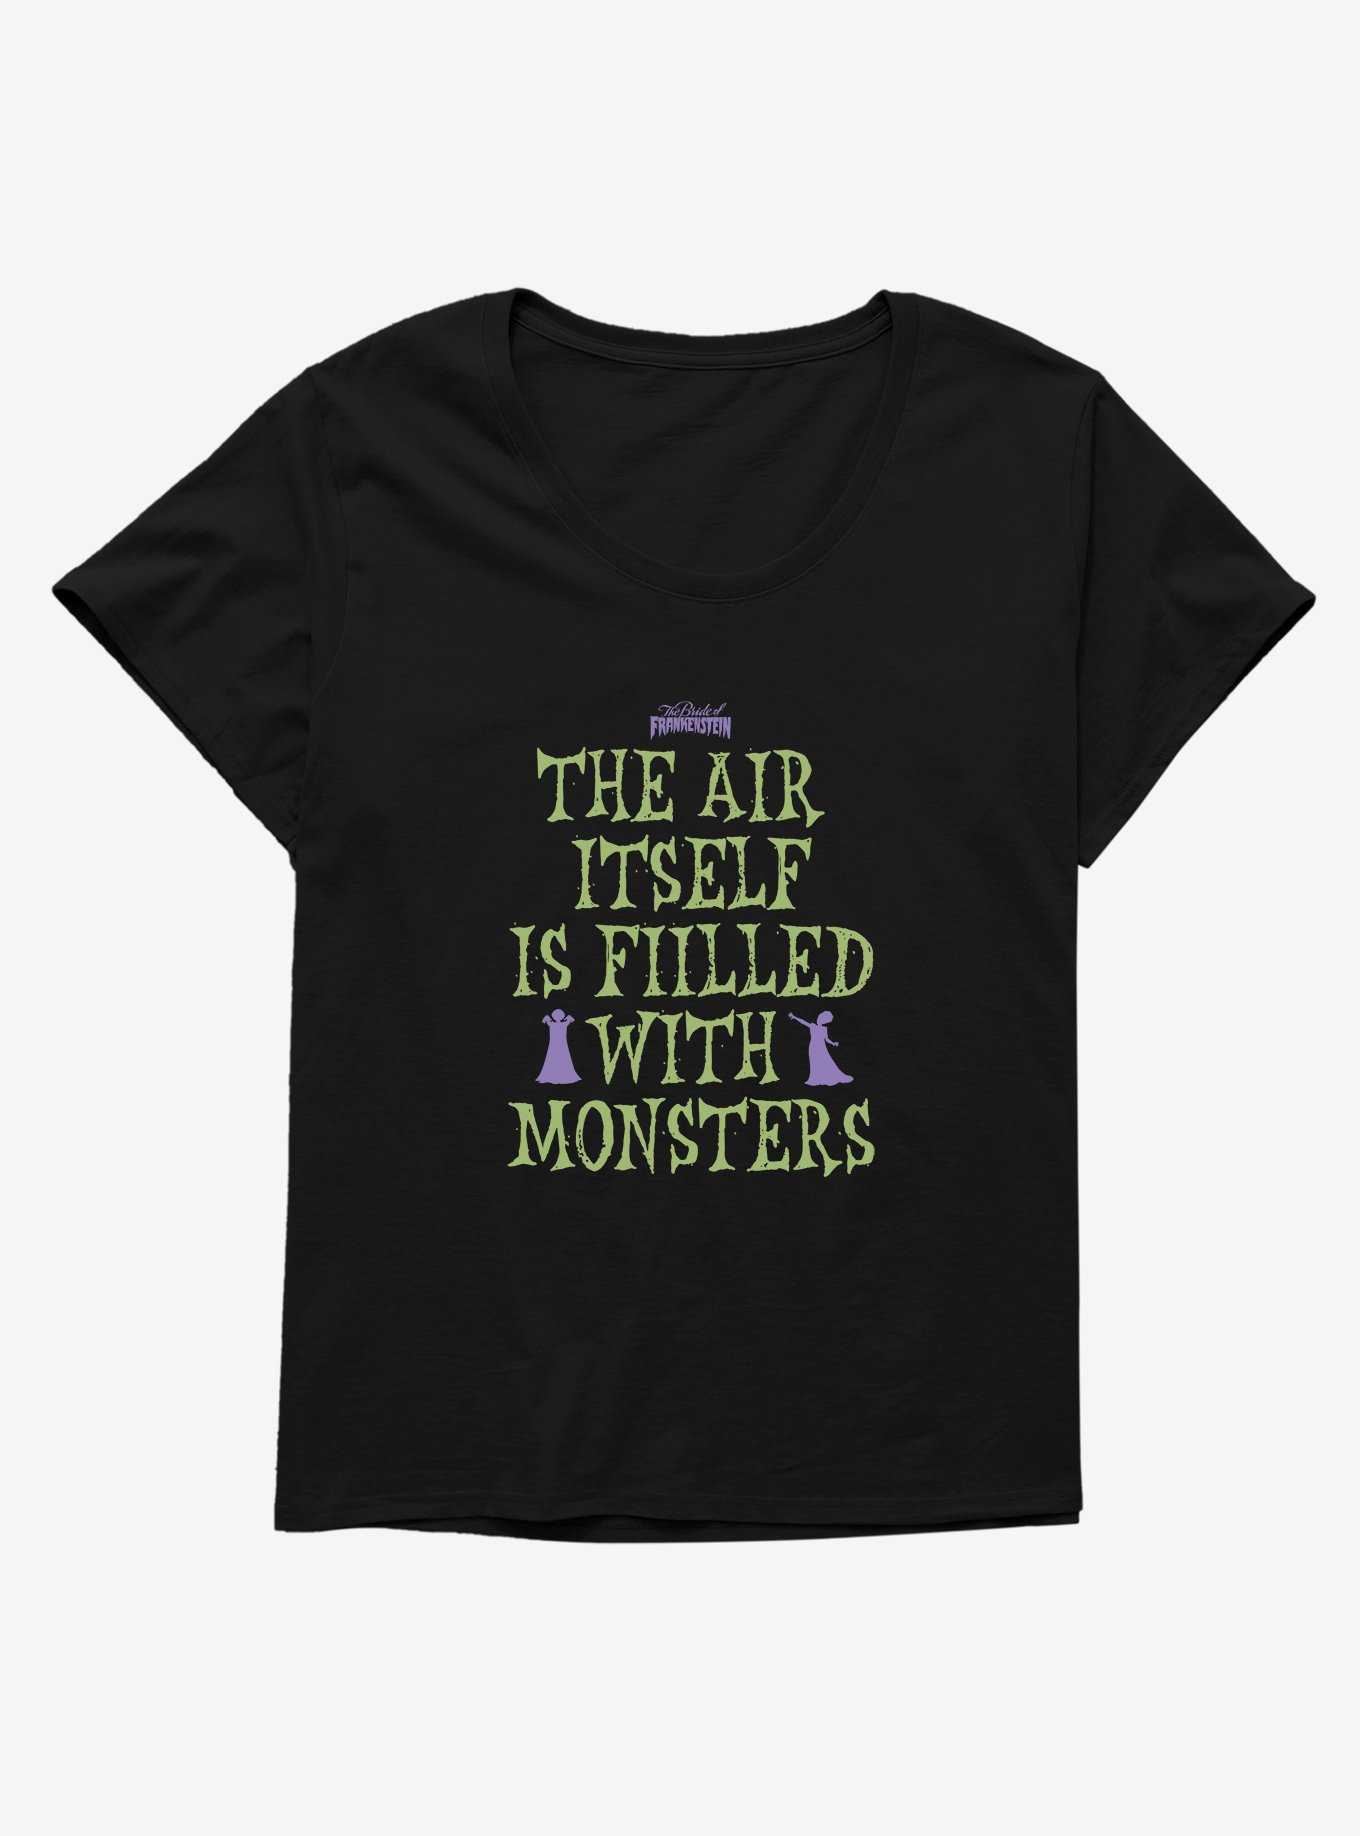 Bride Of Frankenstein Air Filled With Monsters Girls T-Shirt Plus Size, , hi-res